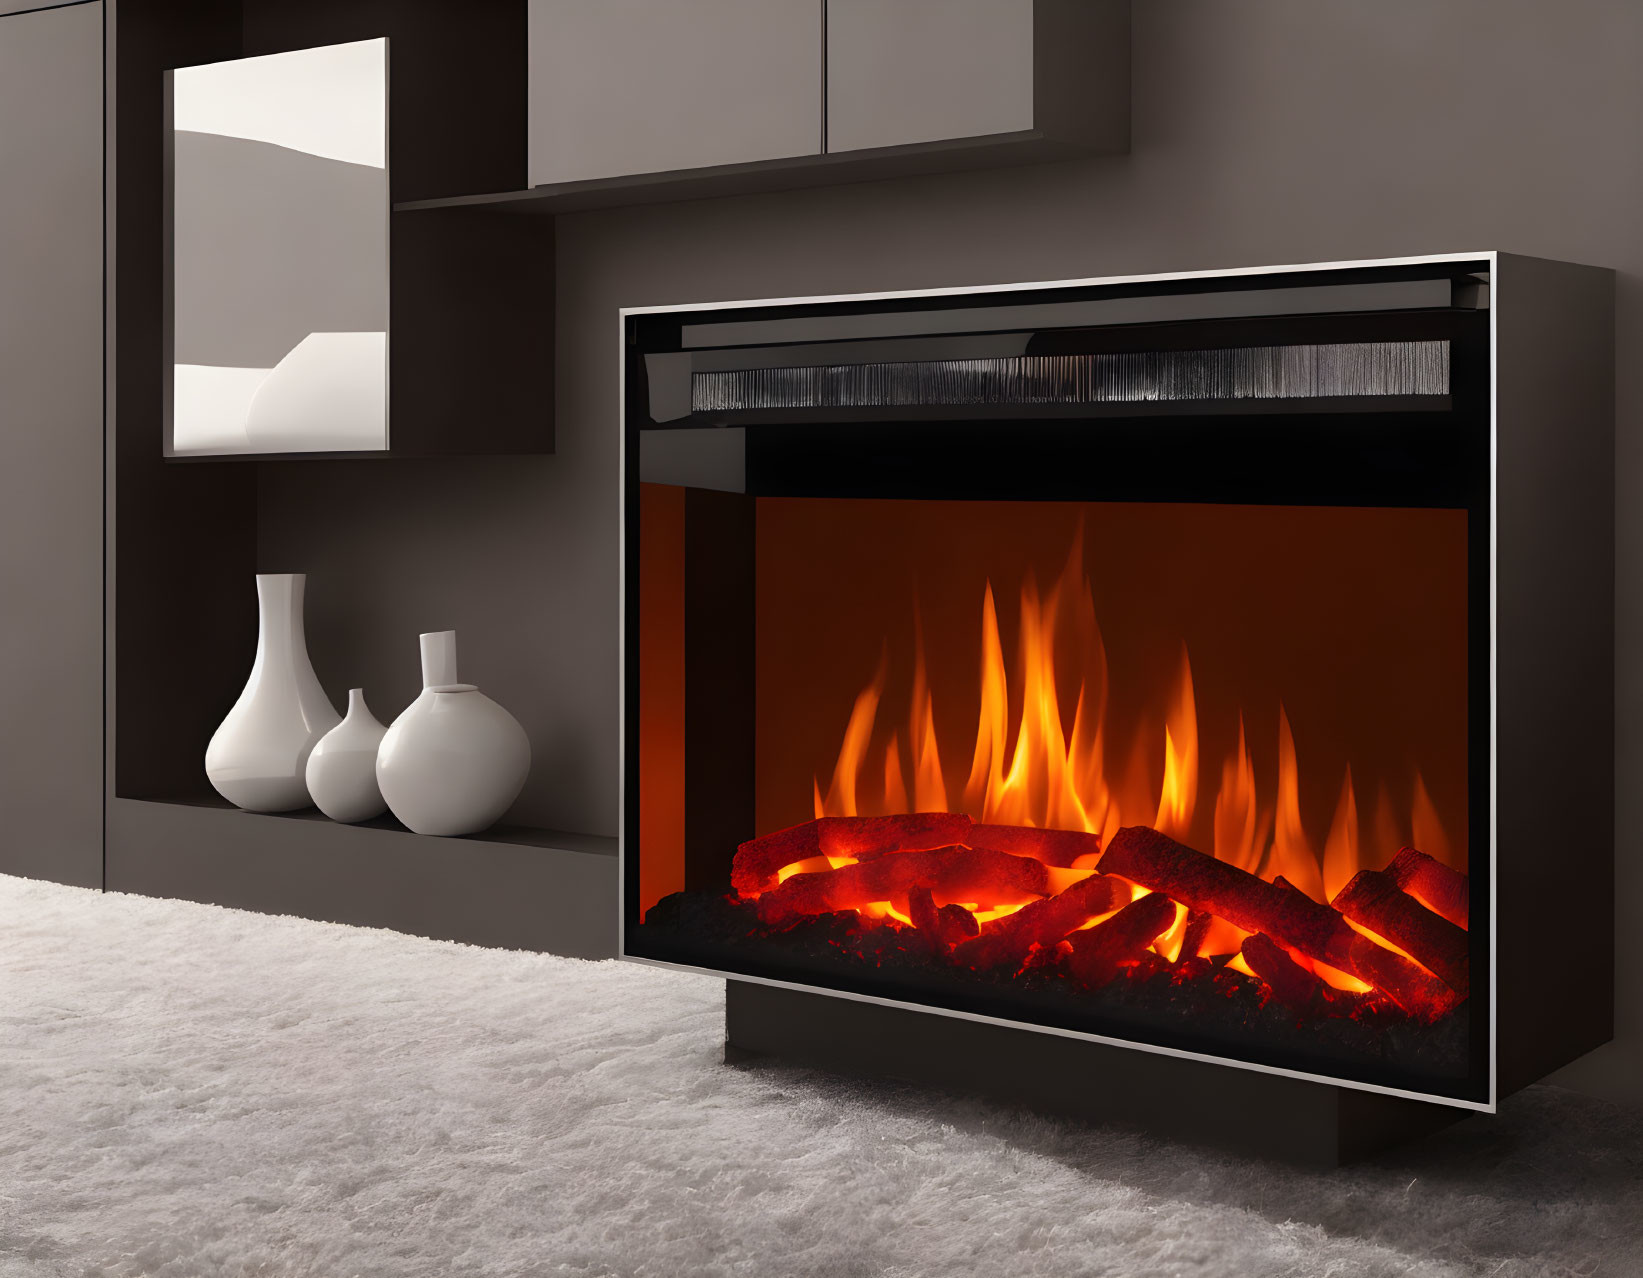 Contemporary Electric Fireplace with Orange Flames in Black Unit